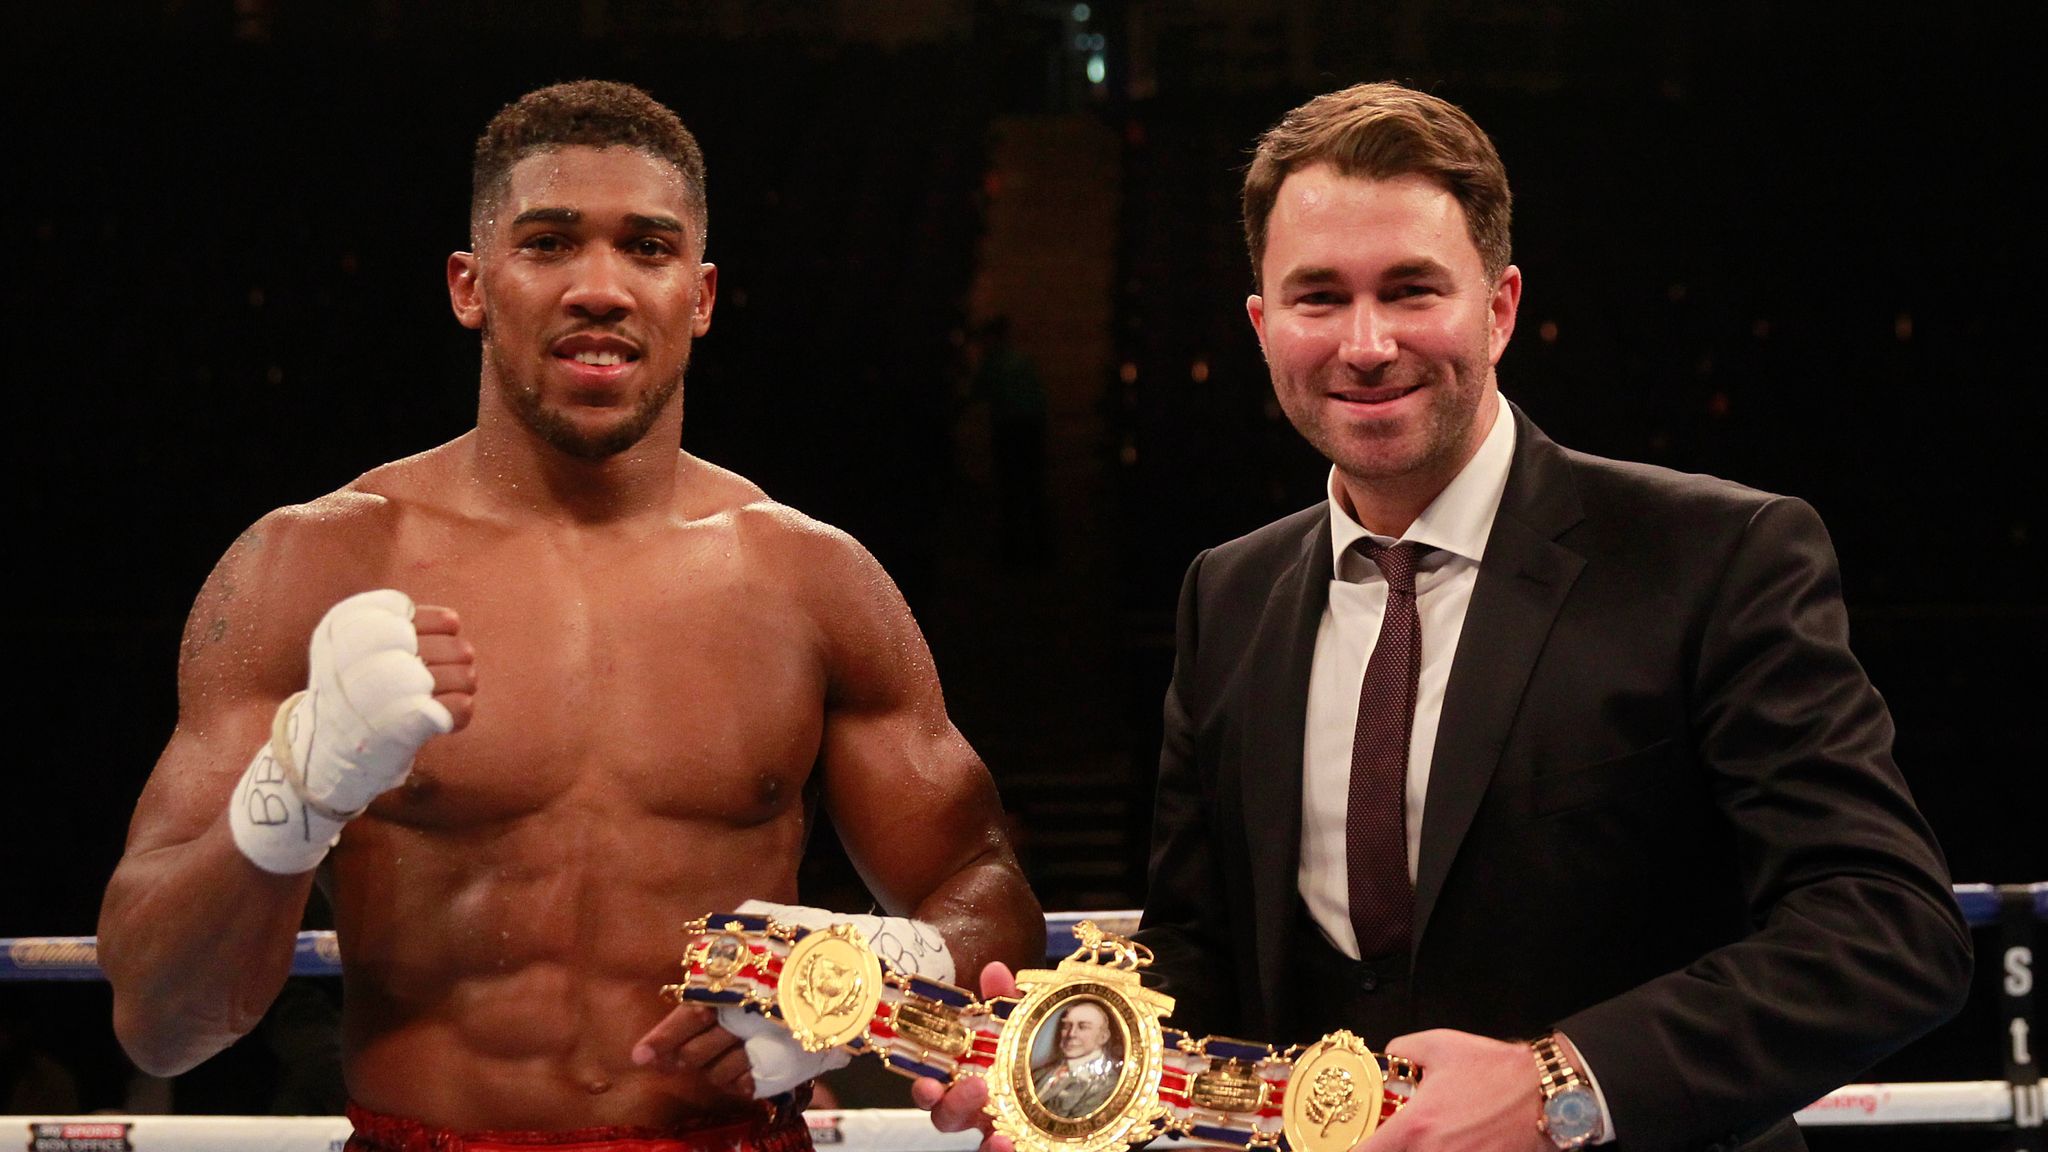 Anthony Joshua will be roared to glory against Charles Martin, says Eddie Hearn | Boxing News | Sky Sports